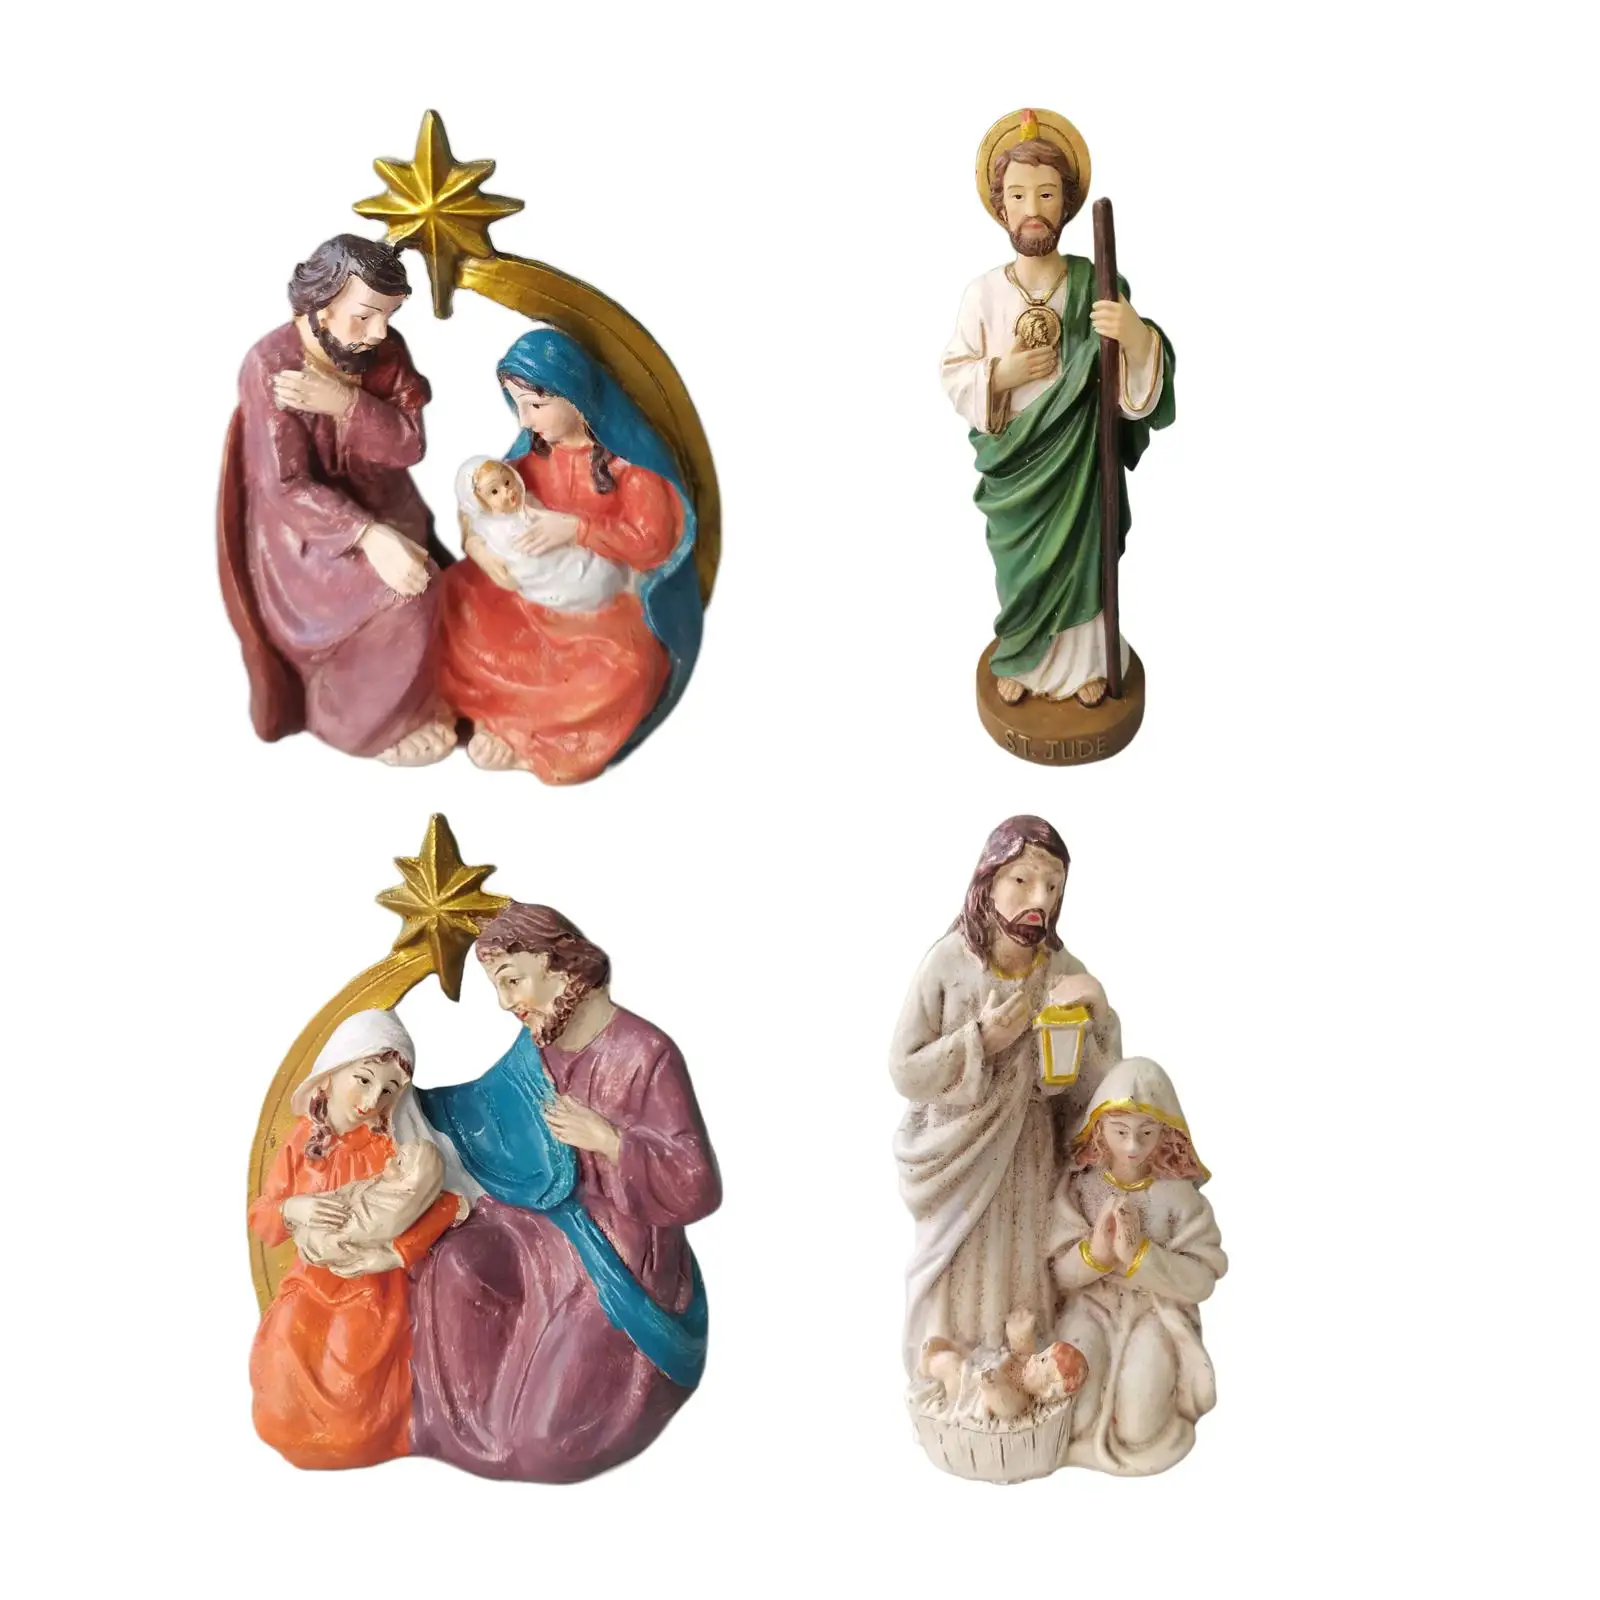 Holy Family Nativity Statues Baby Jesus Figurine Ornament Sculpture Religious Figure for Christmas Church Decor Collectibles